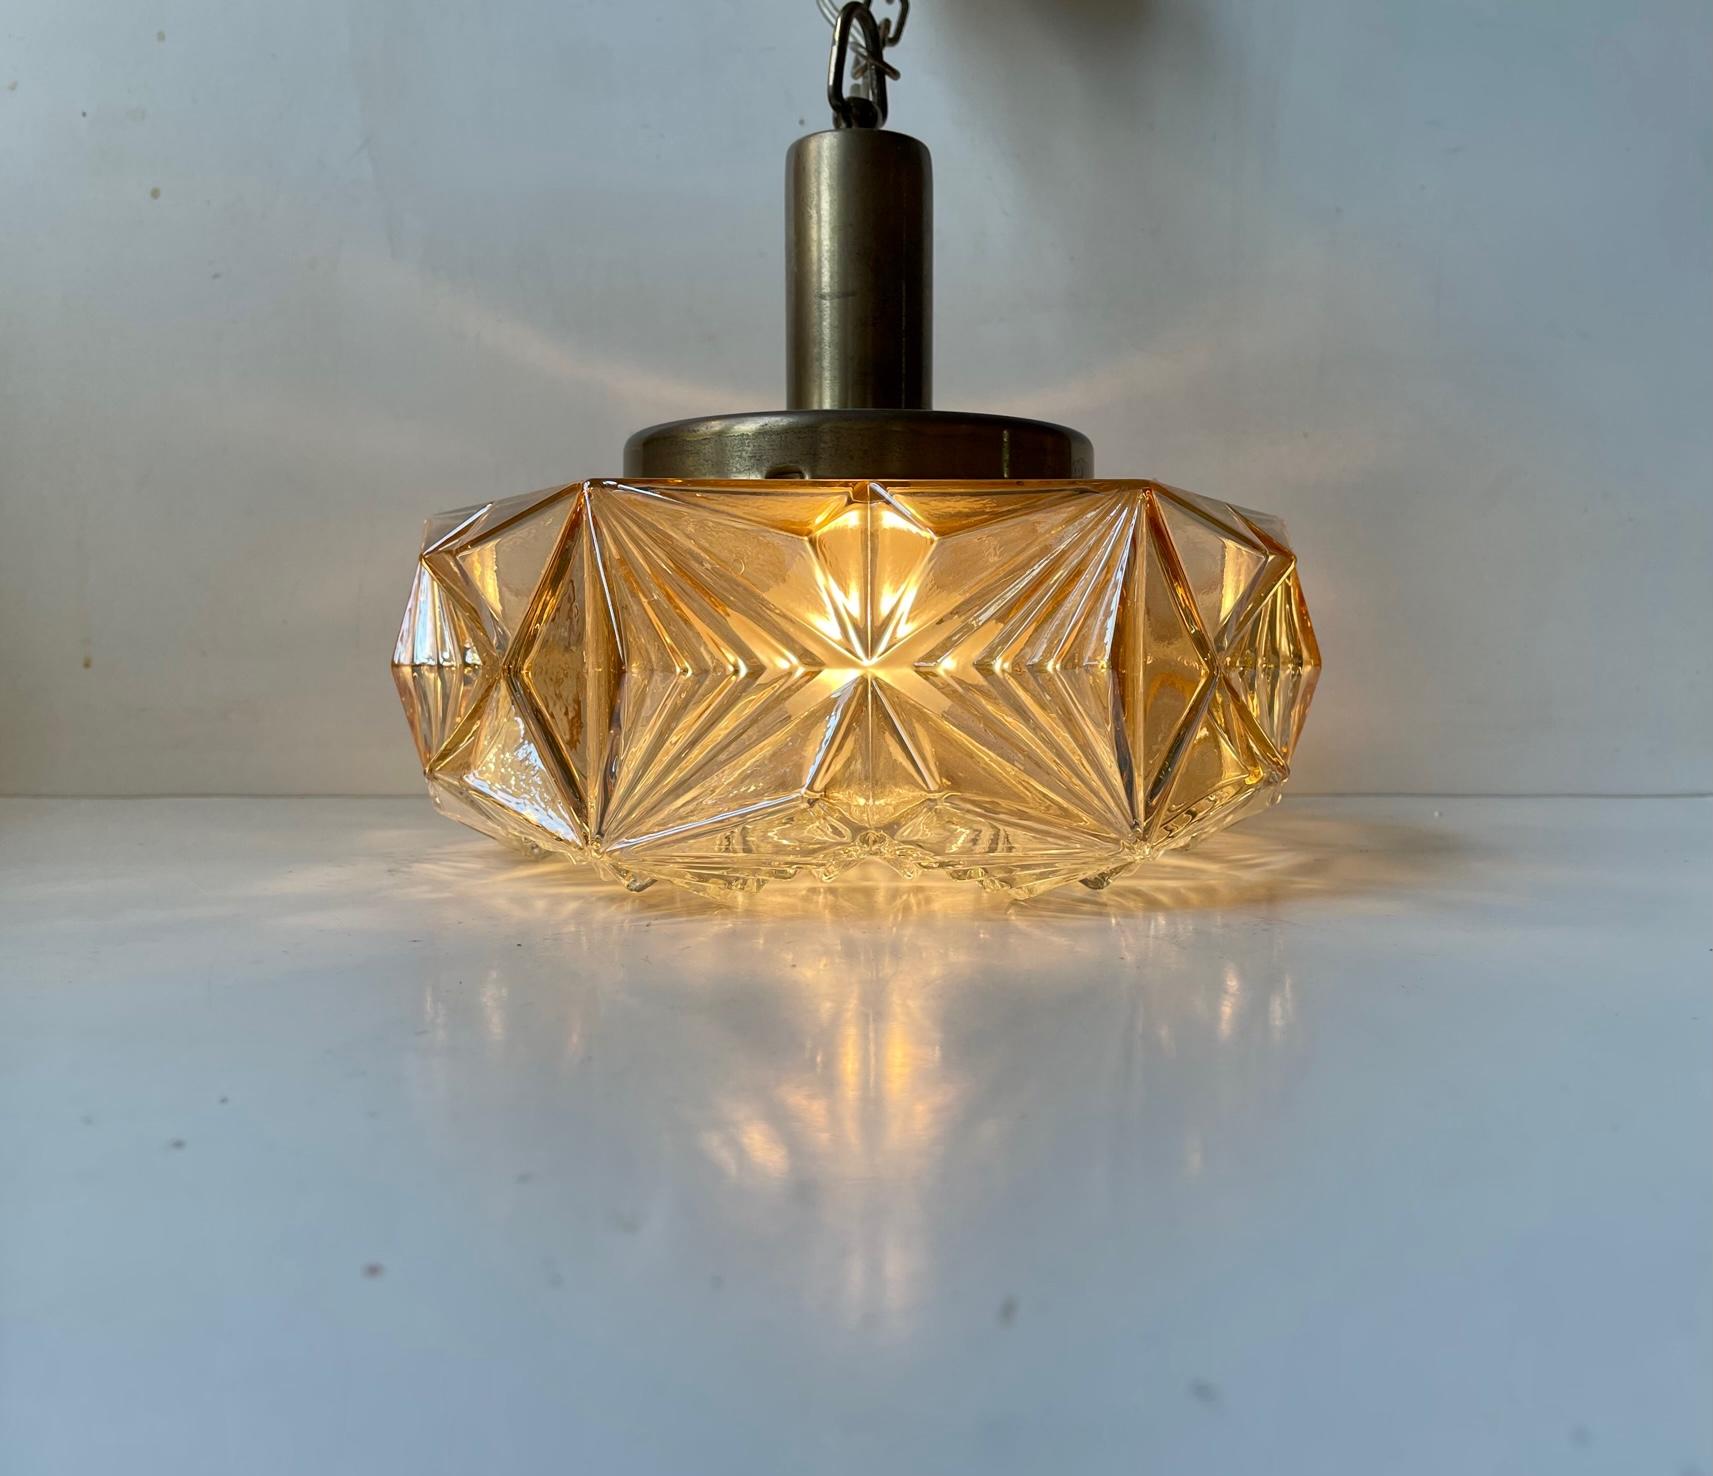 Cut Glass Scandinavian Modern Brass and Honey Glass Ceiling Lamp by Vitrika, 1960s For Sale